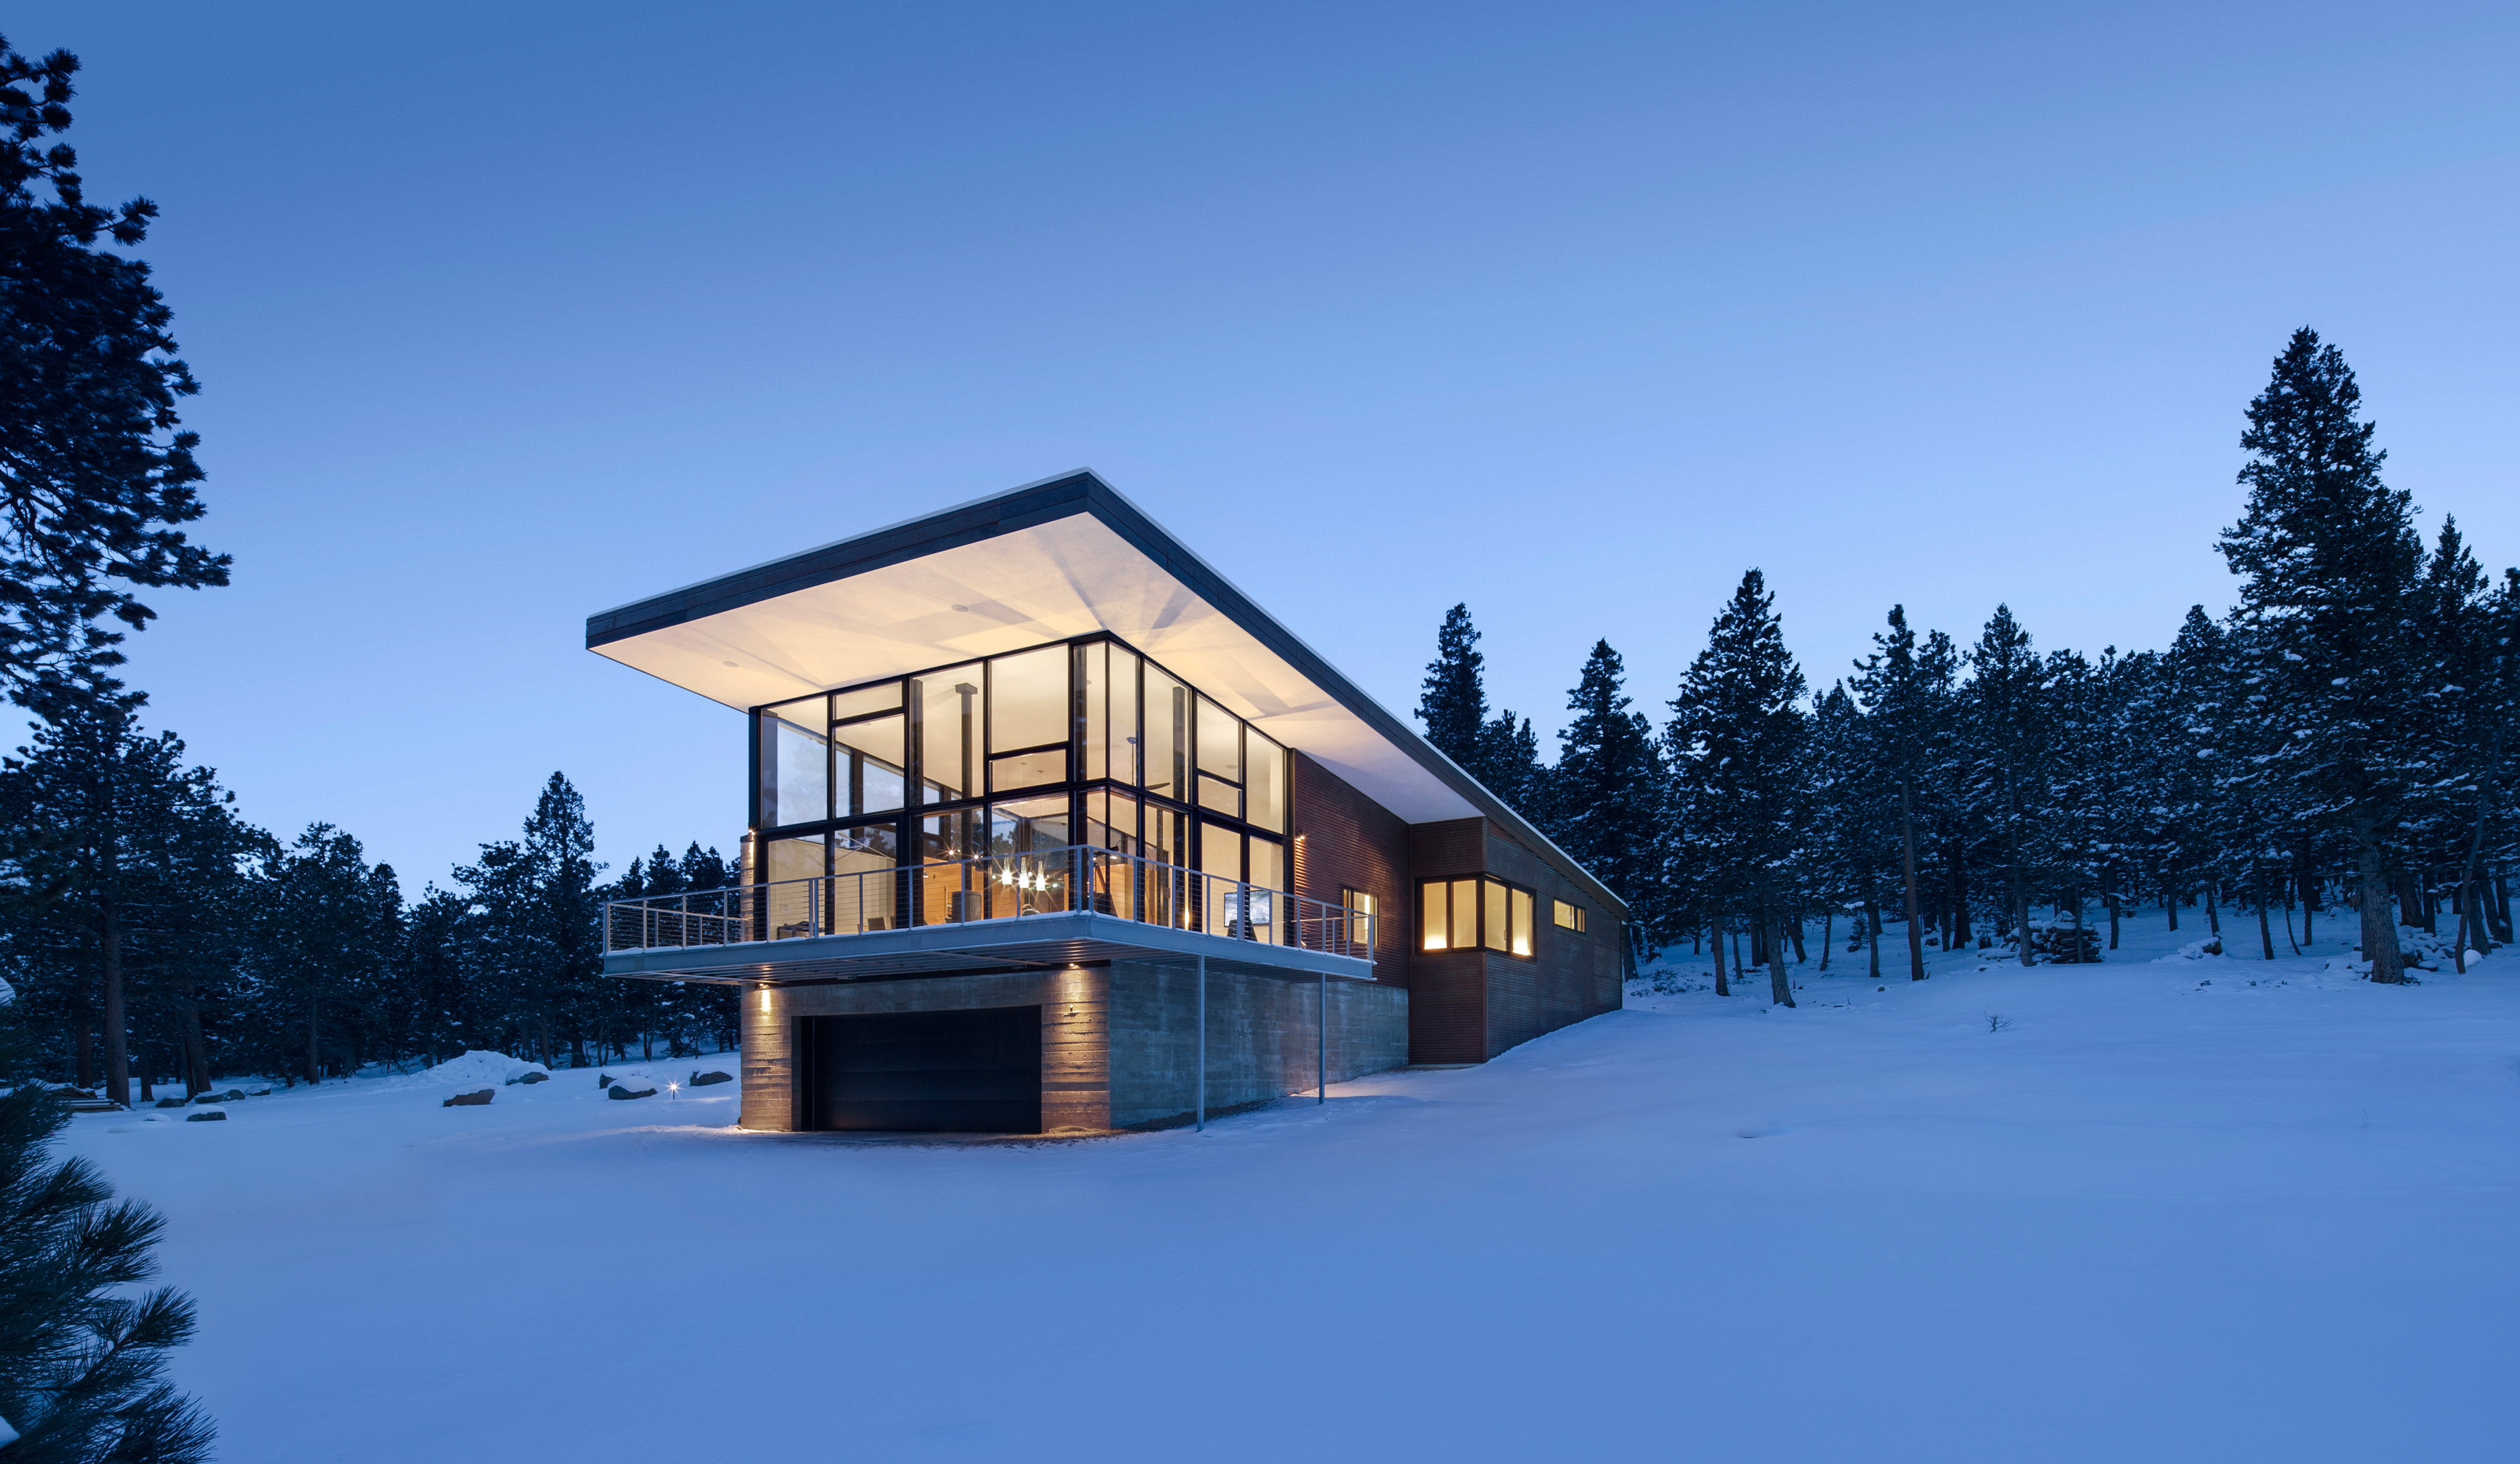 Lodgepole Residence by Arch11